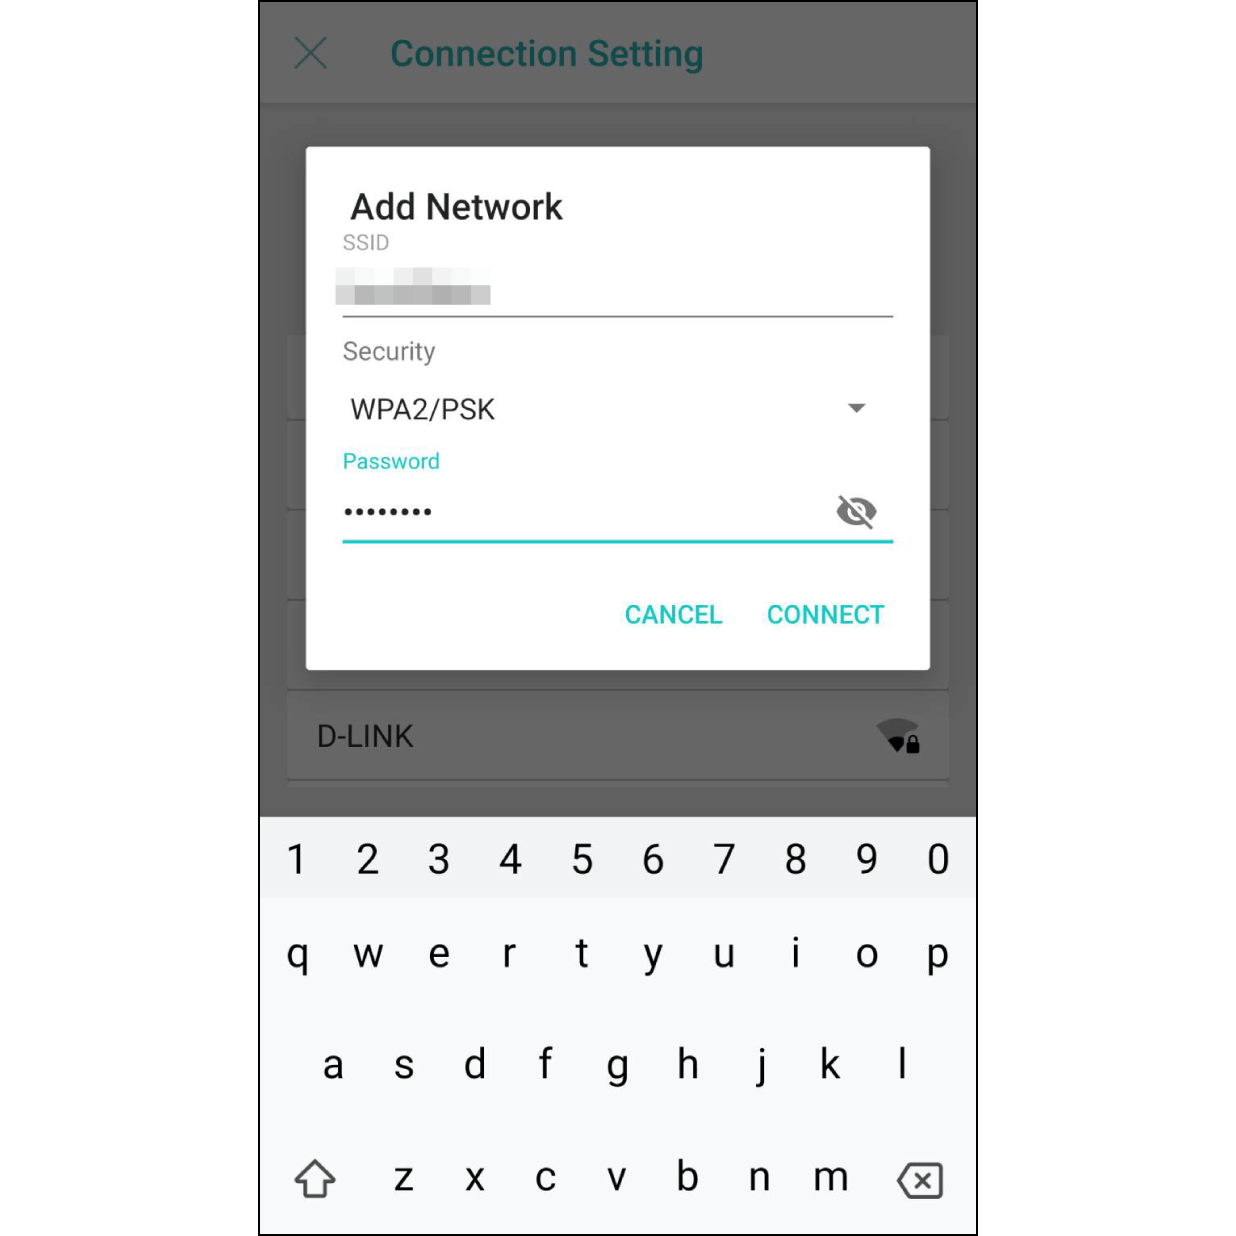 9. Connect to Personal Hotspot. Enter the corresponding network name, set security to "WPA/WPA2 PSK", then enter the password. *Please note that network name and password are case sensitive.